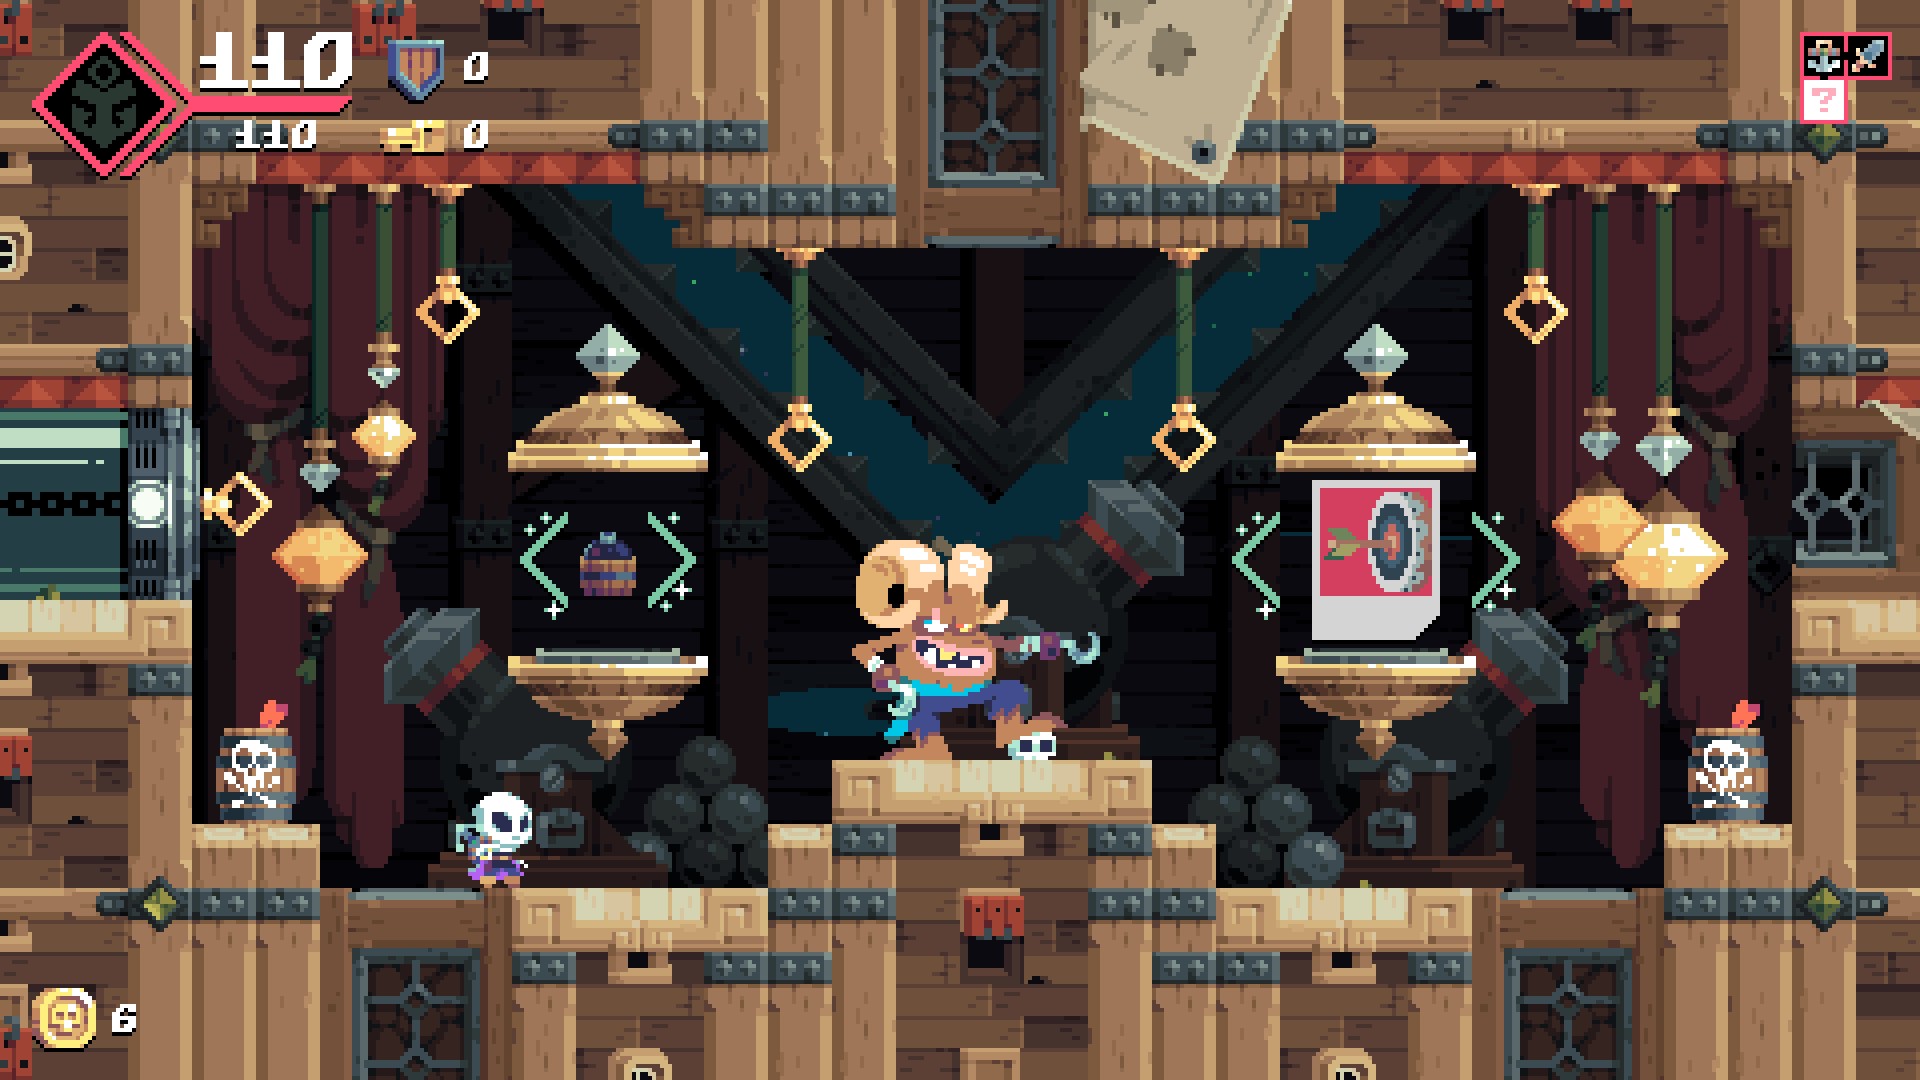 Flinthook Is A Tough But Fair Game About A Space Pirate